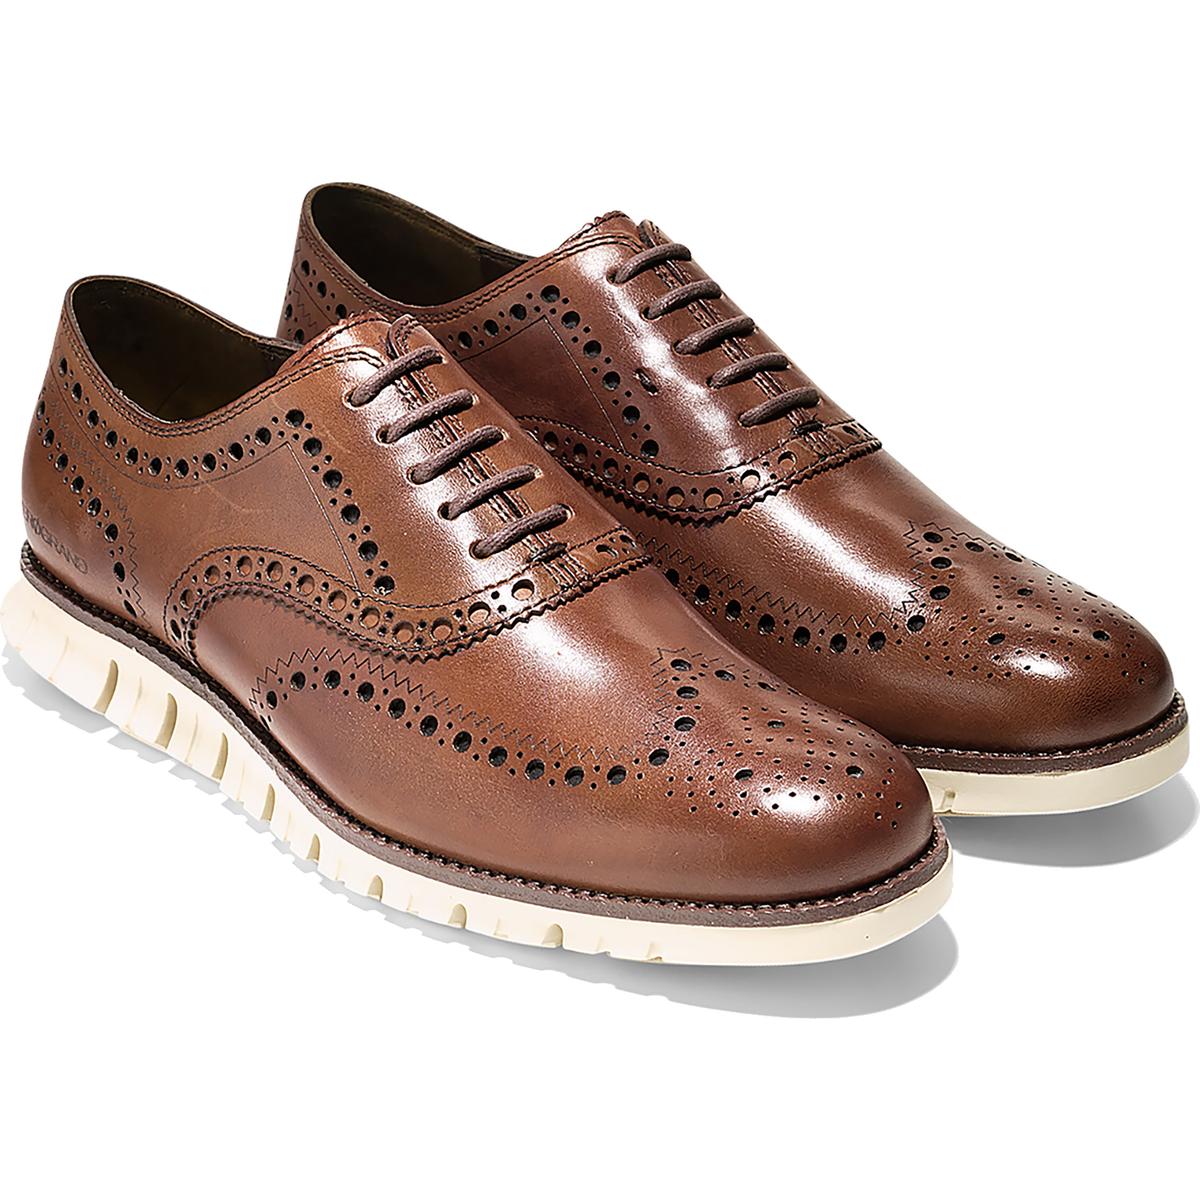 Cole Haan Mens Warren Apron Leathe Lace Up Dressy Loafers Shoes BHFO 2558